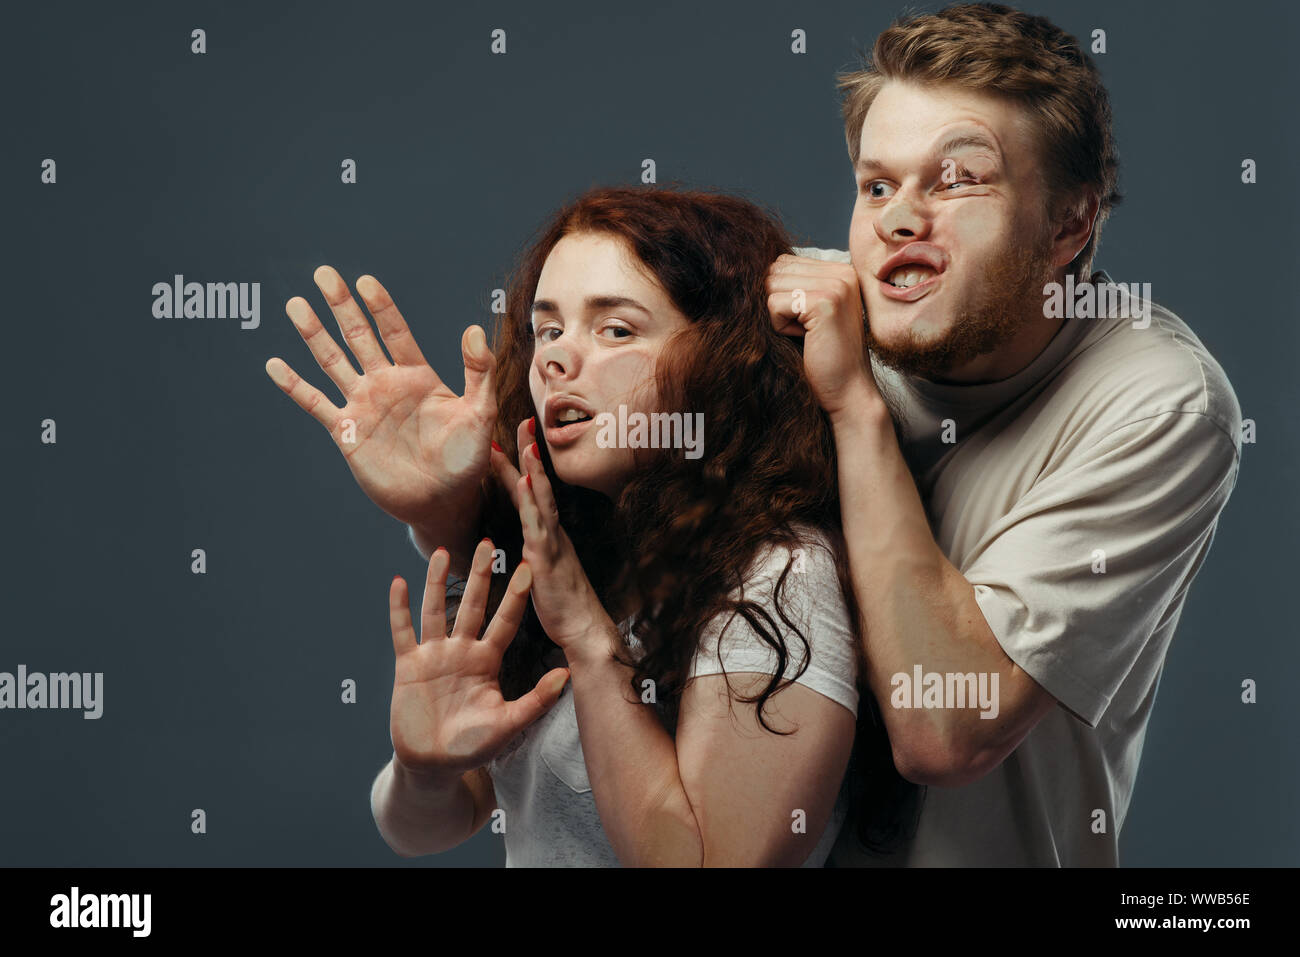 Couple faces crushed on glass, funny emotion Stock Photo